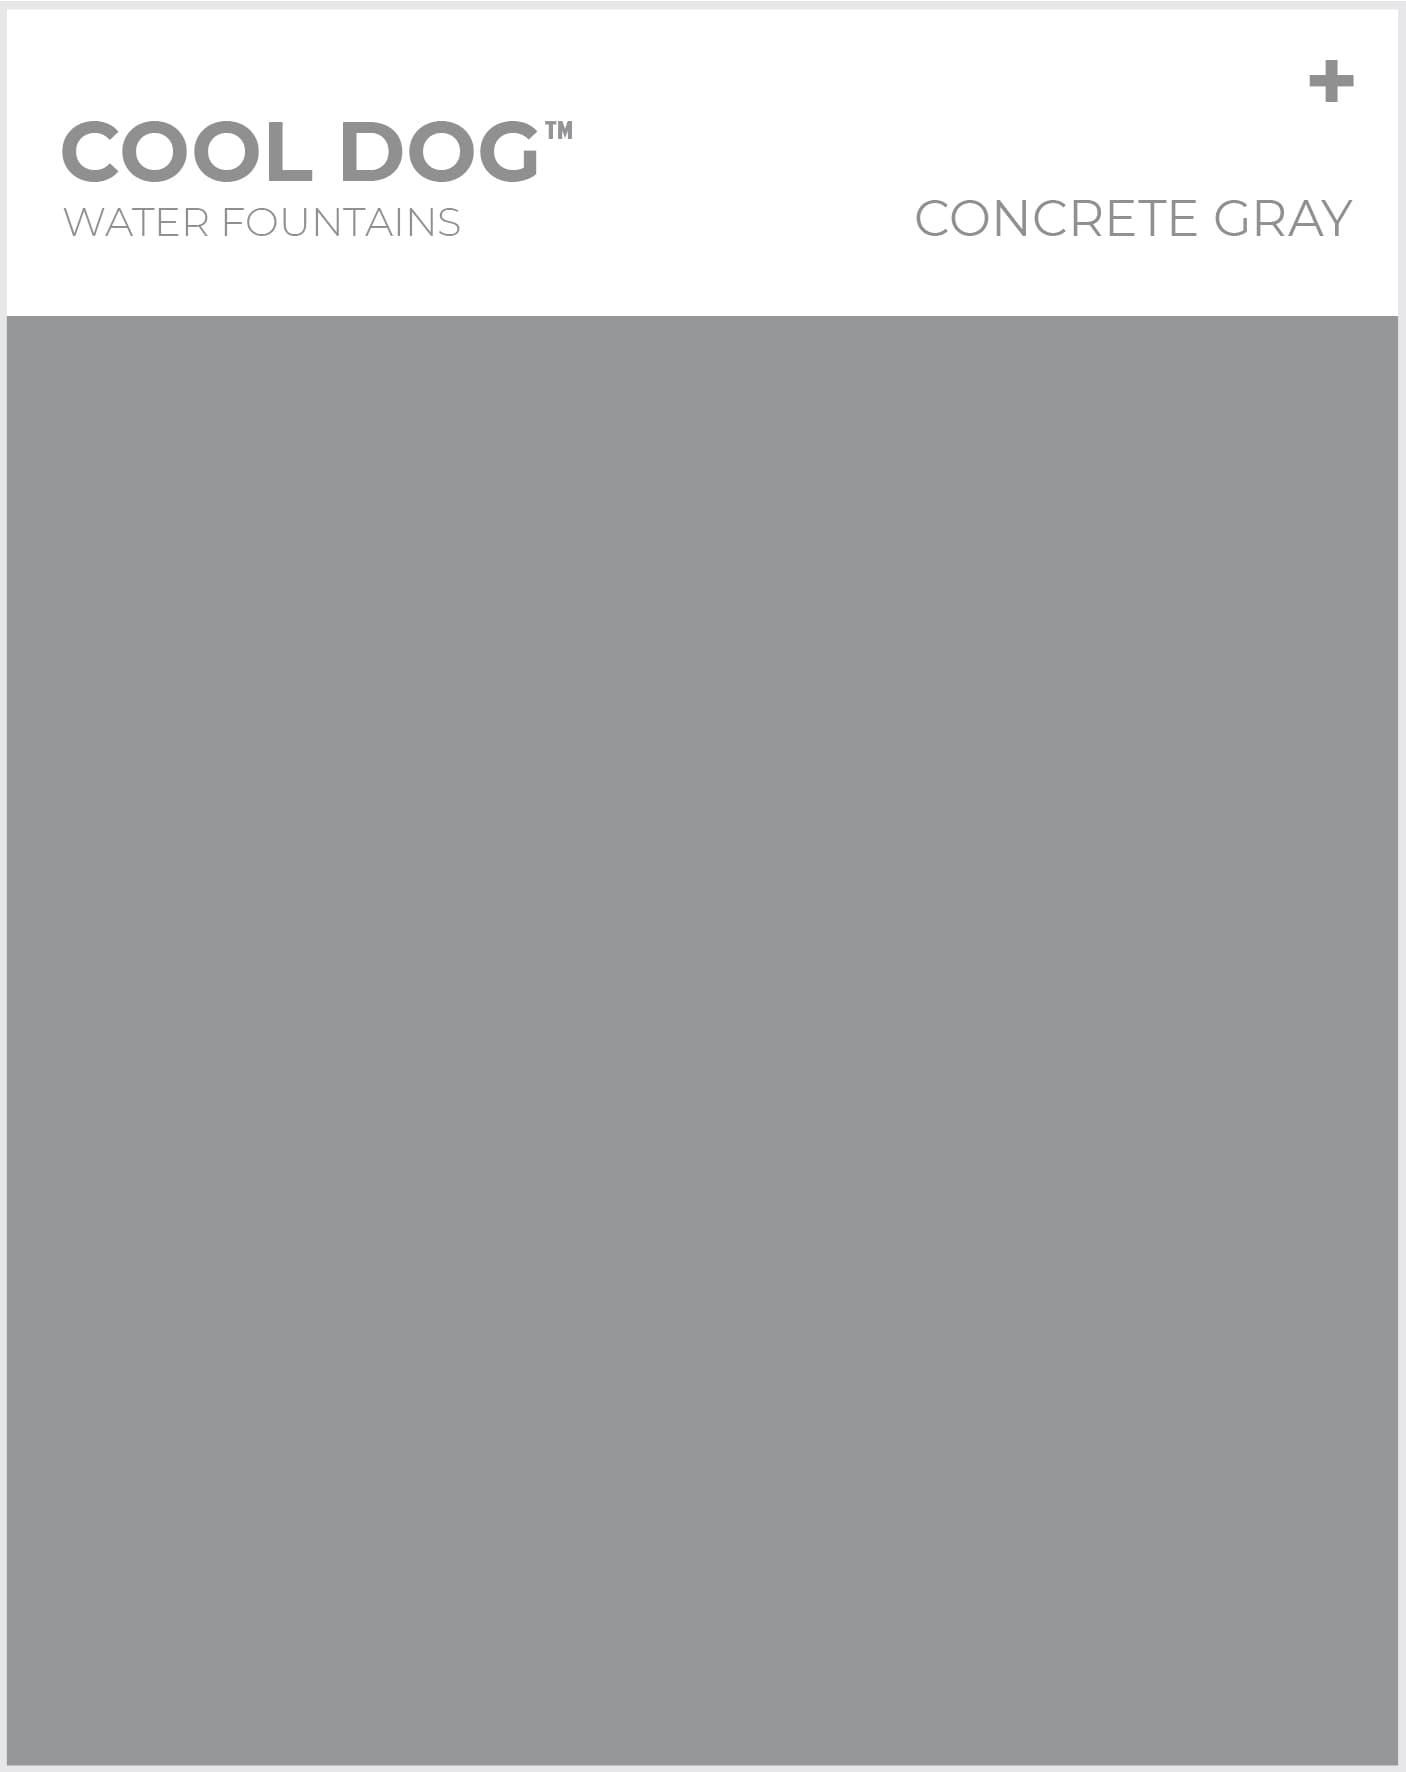 Cool Dog Water Fountains - Concrete Gray